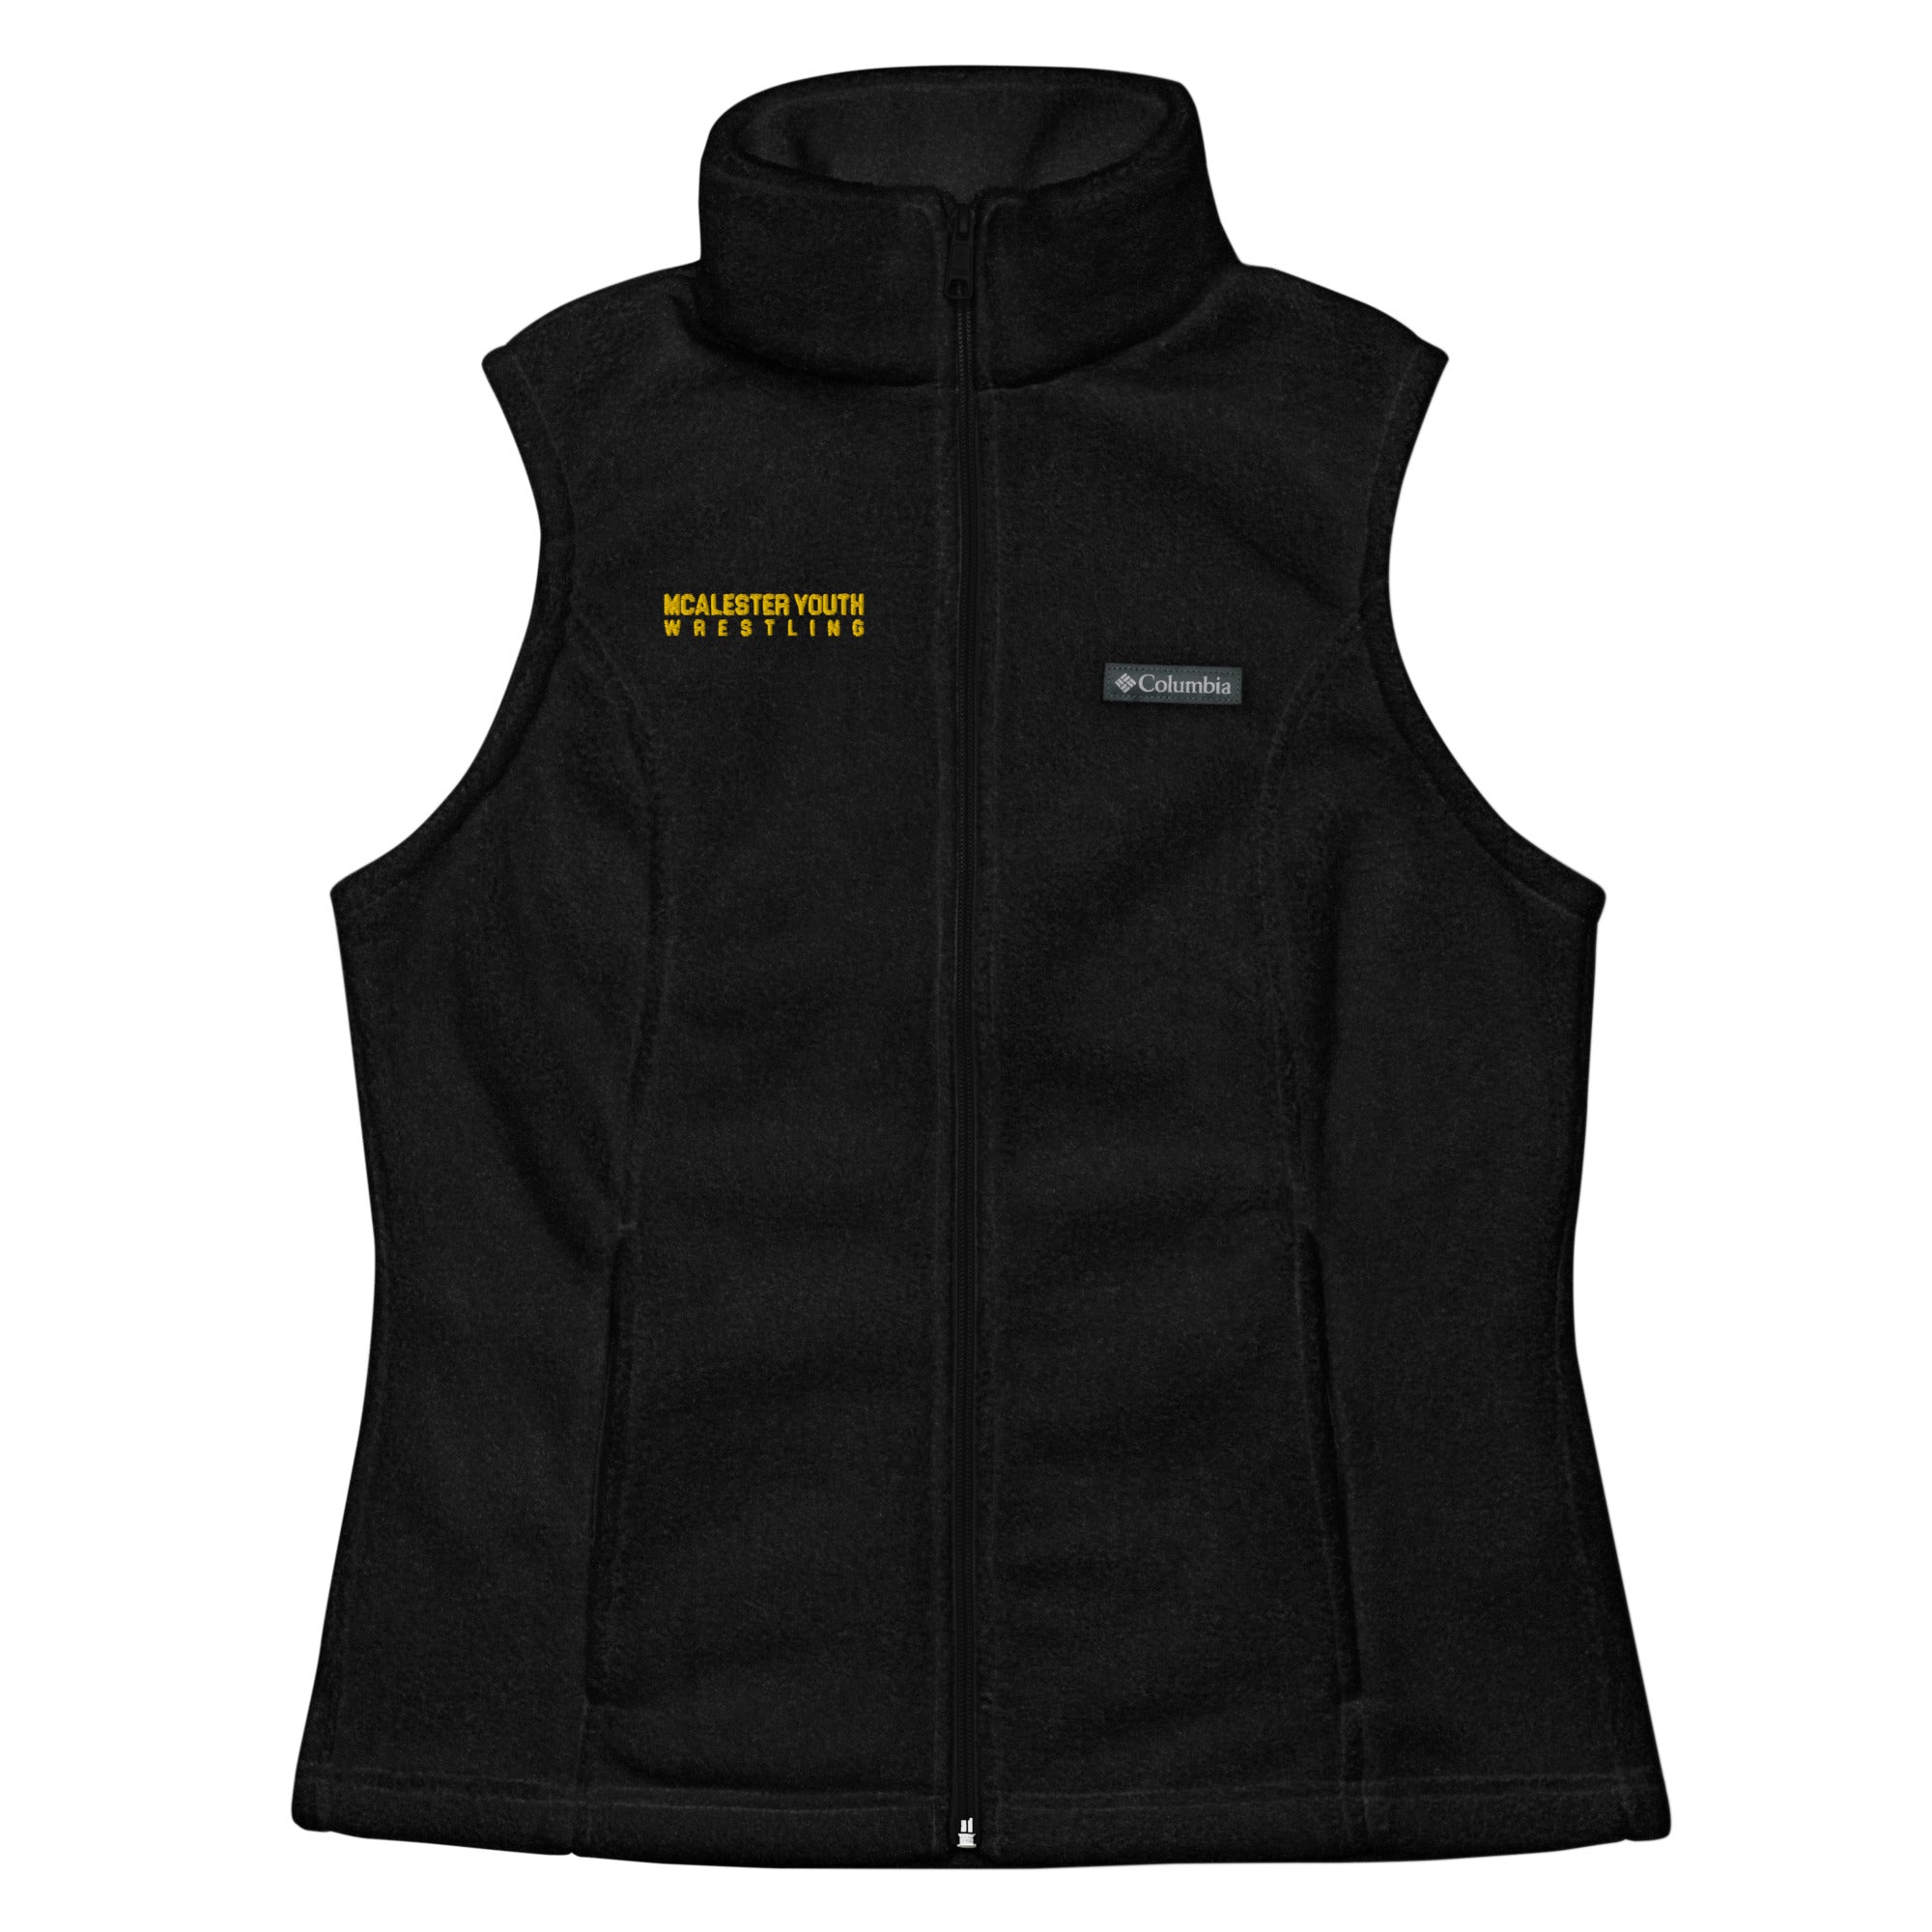 McAlester Youth Wrestling Womens Columbia Fleece Vest